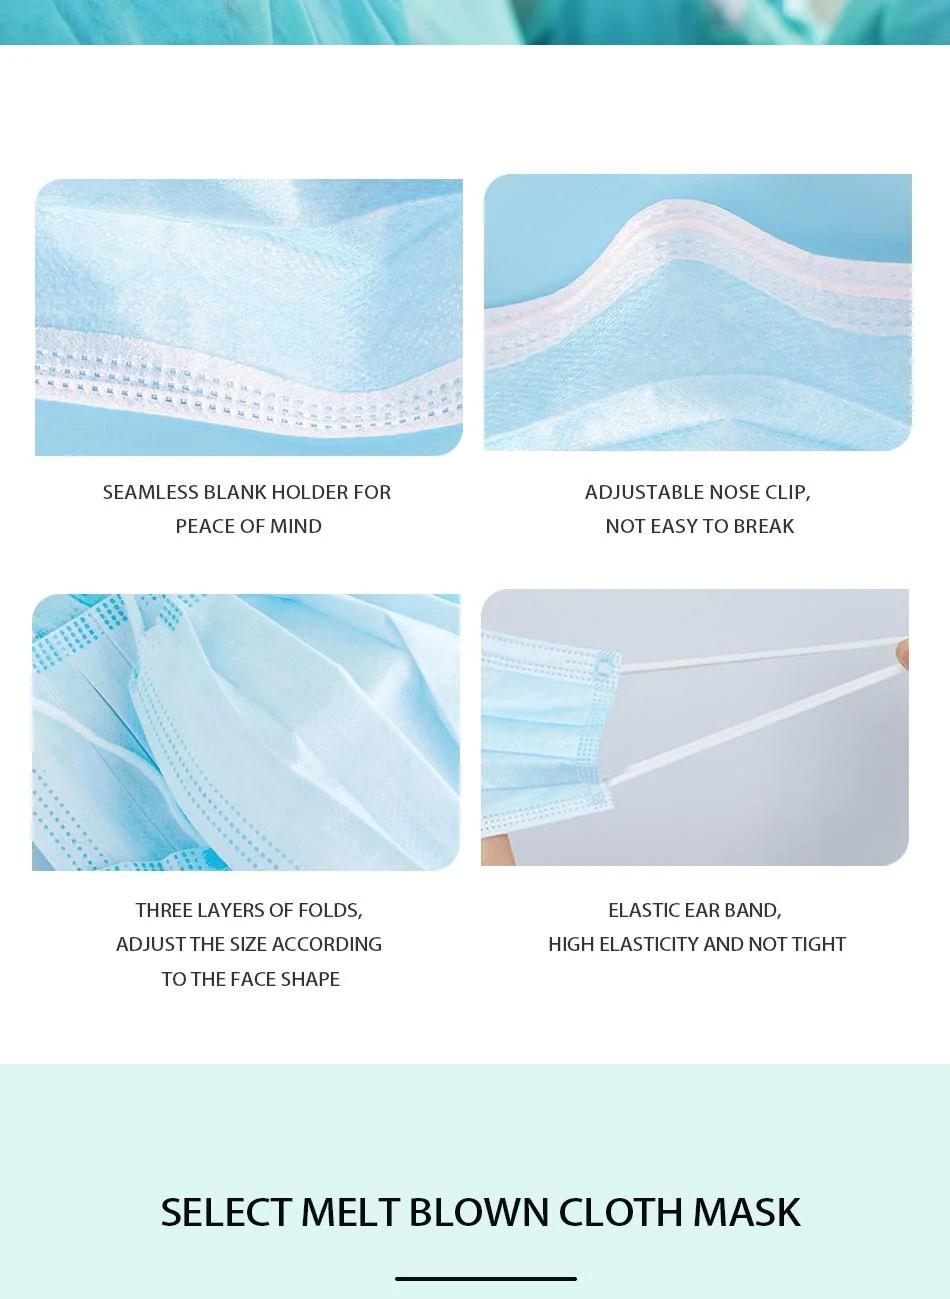 3 Ply Disposable Elastic Ear-Loop Adult Anti-Virus FDA 510K CE En14683 Approved Non-Woven Fabric Blue Medical Face Mask